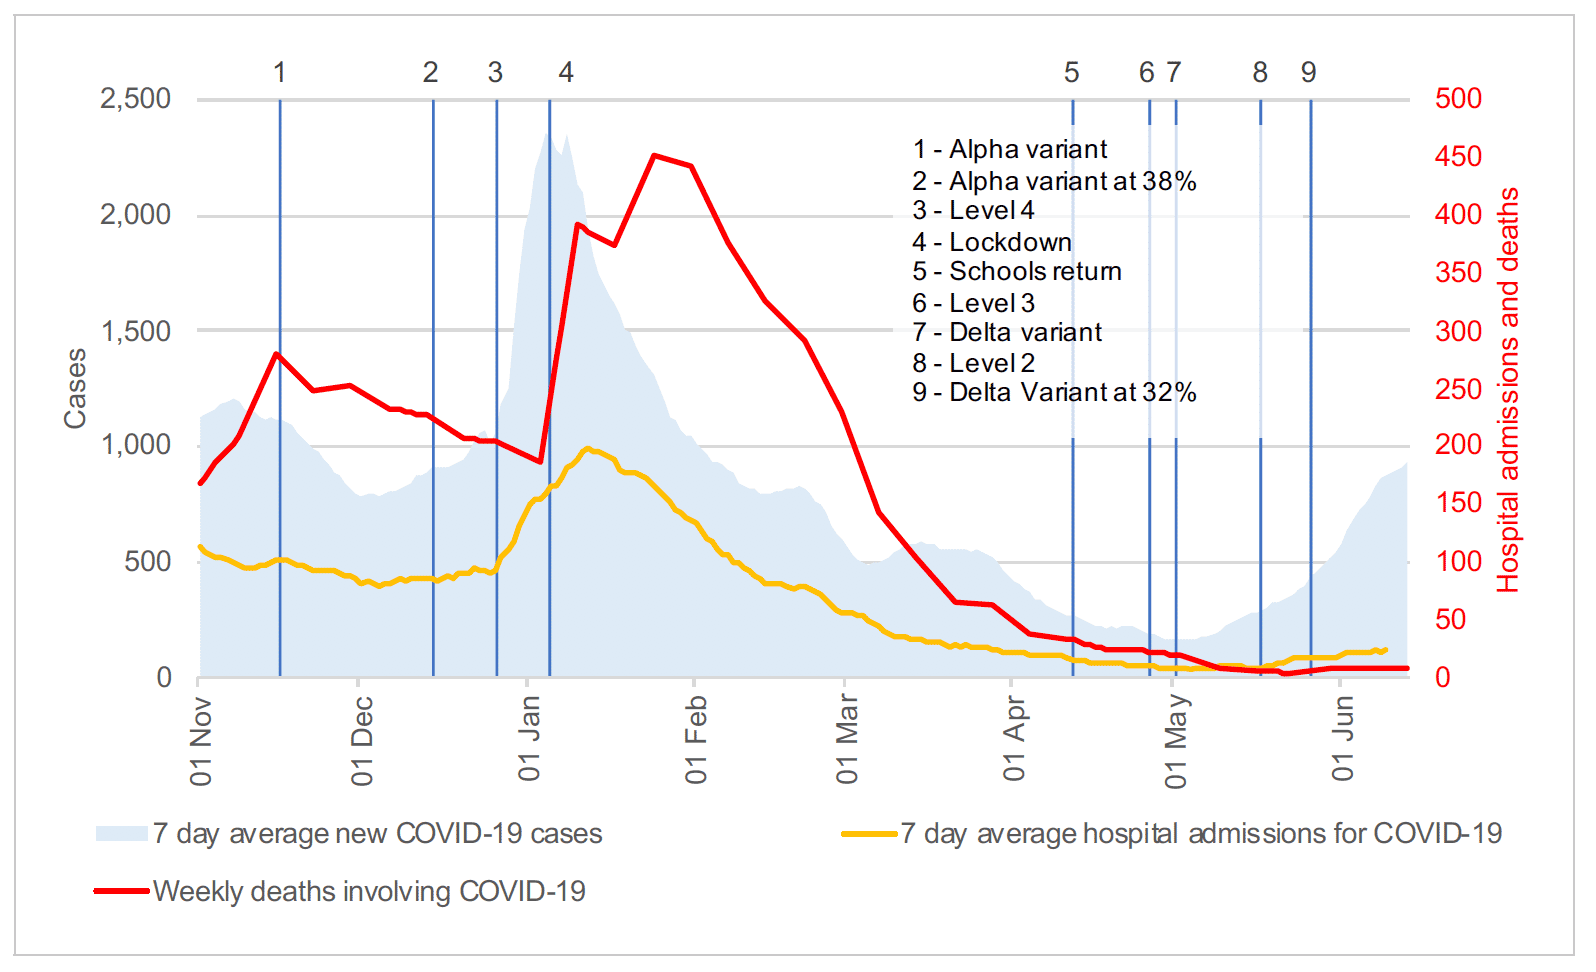 This line graph shows how COVID cases, hospital admissions and deaths have changed from the 1st of November 2020 to the 13th of June 2021. The following key events are also marked on the chart: the emergence of the Alpha variant in mid-November; entering Level 4 in late December; the Alpha variant making up around half of cases and the second national lockdown in early January; schools returning in early April; mainland Scotland moving to Level 3 in late April; the emergence of the Delta variant in early May; mainland Scotland moving to Level 2 in mid-May and the Delta variant making up around half of new cases in early June. The graph shows that as 7 day average cases increased in December, 7 day average hospital admissions increased, followed by weekly deaths. However while cases have risen in May and June as quickly as they did in December, hospital admissions and deaths have increased less than they did in previous waves.